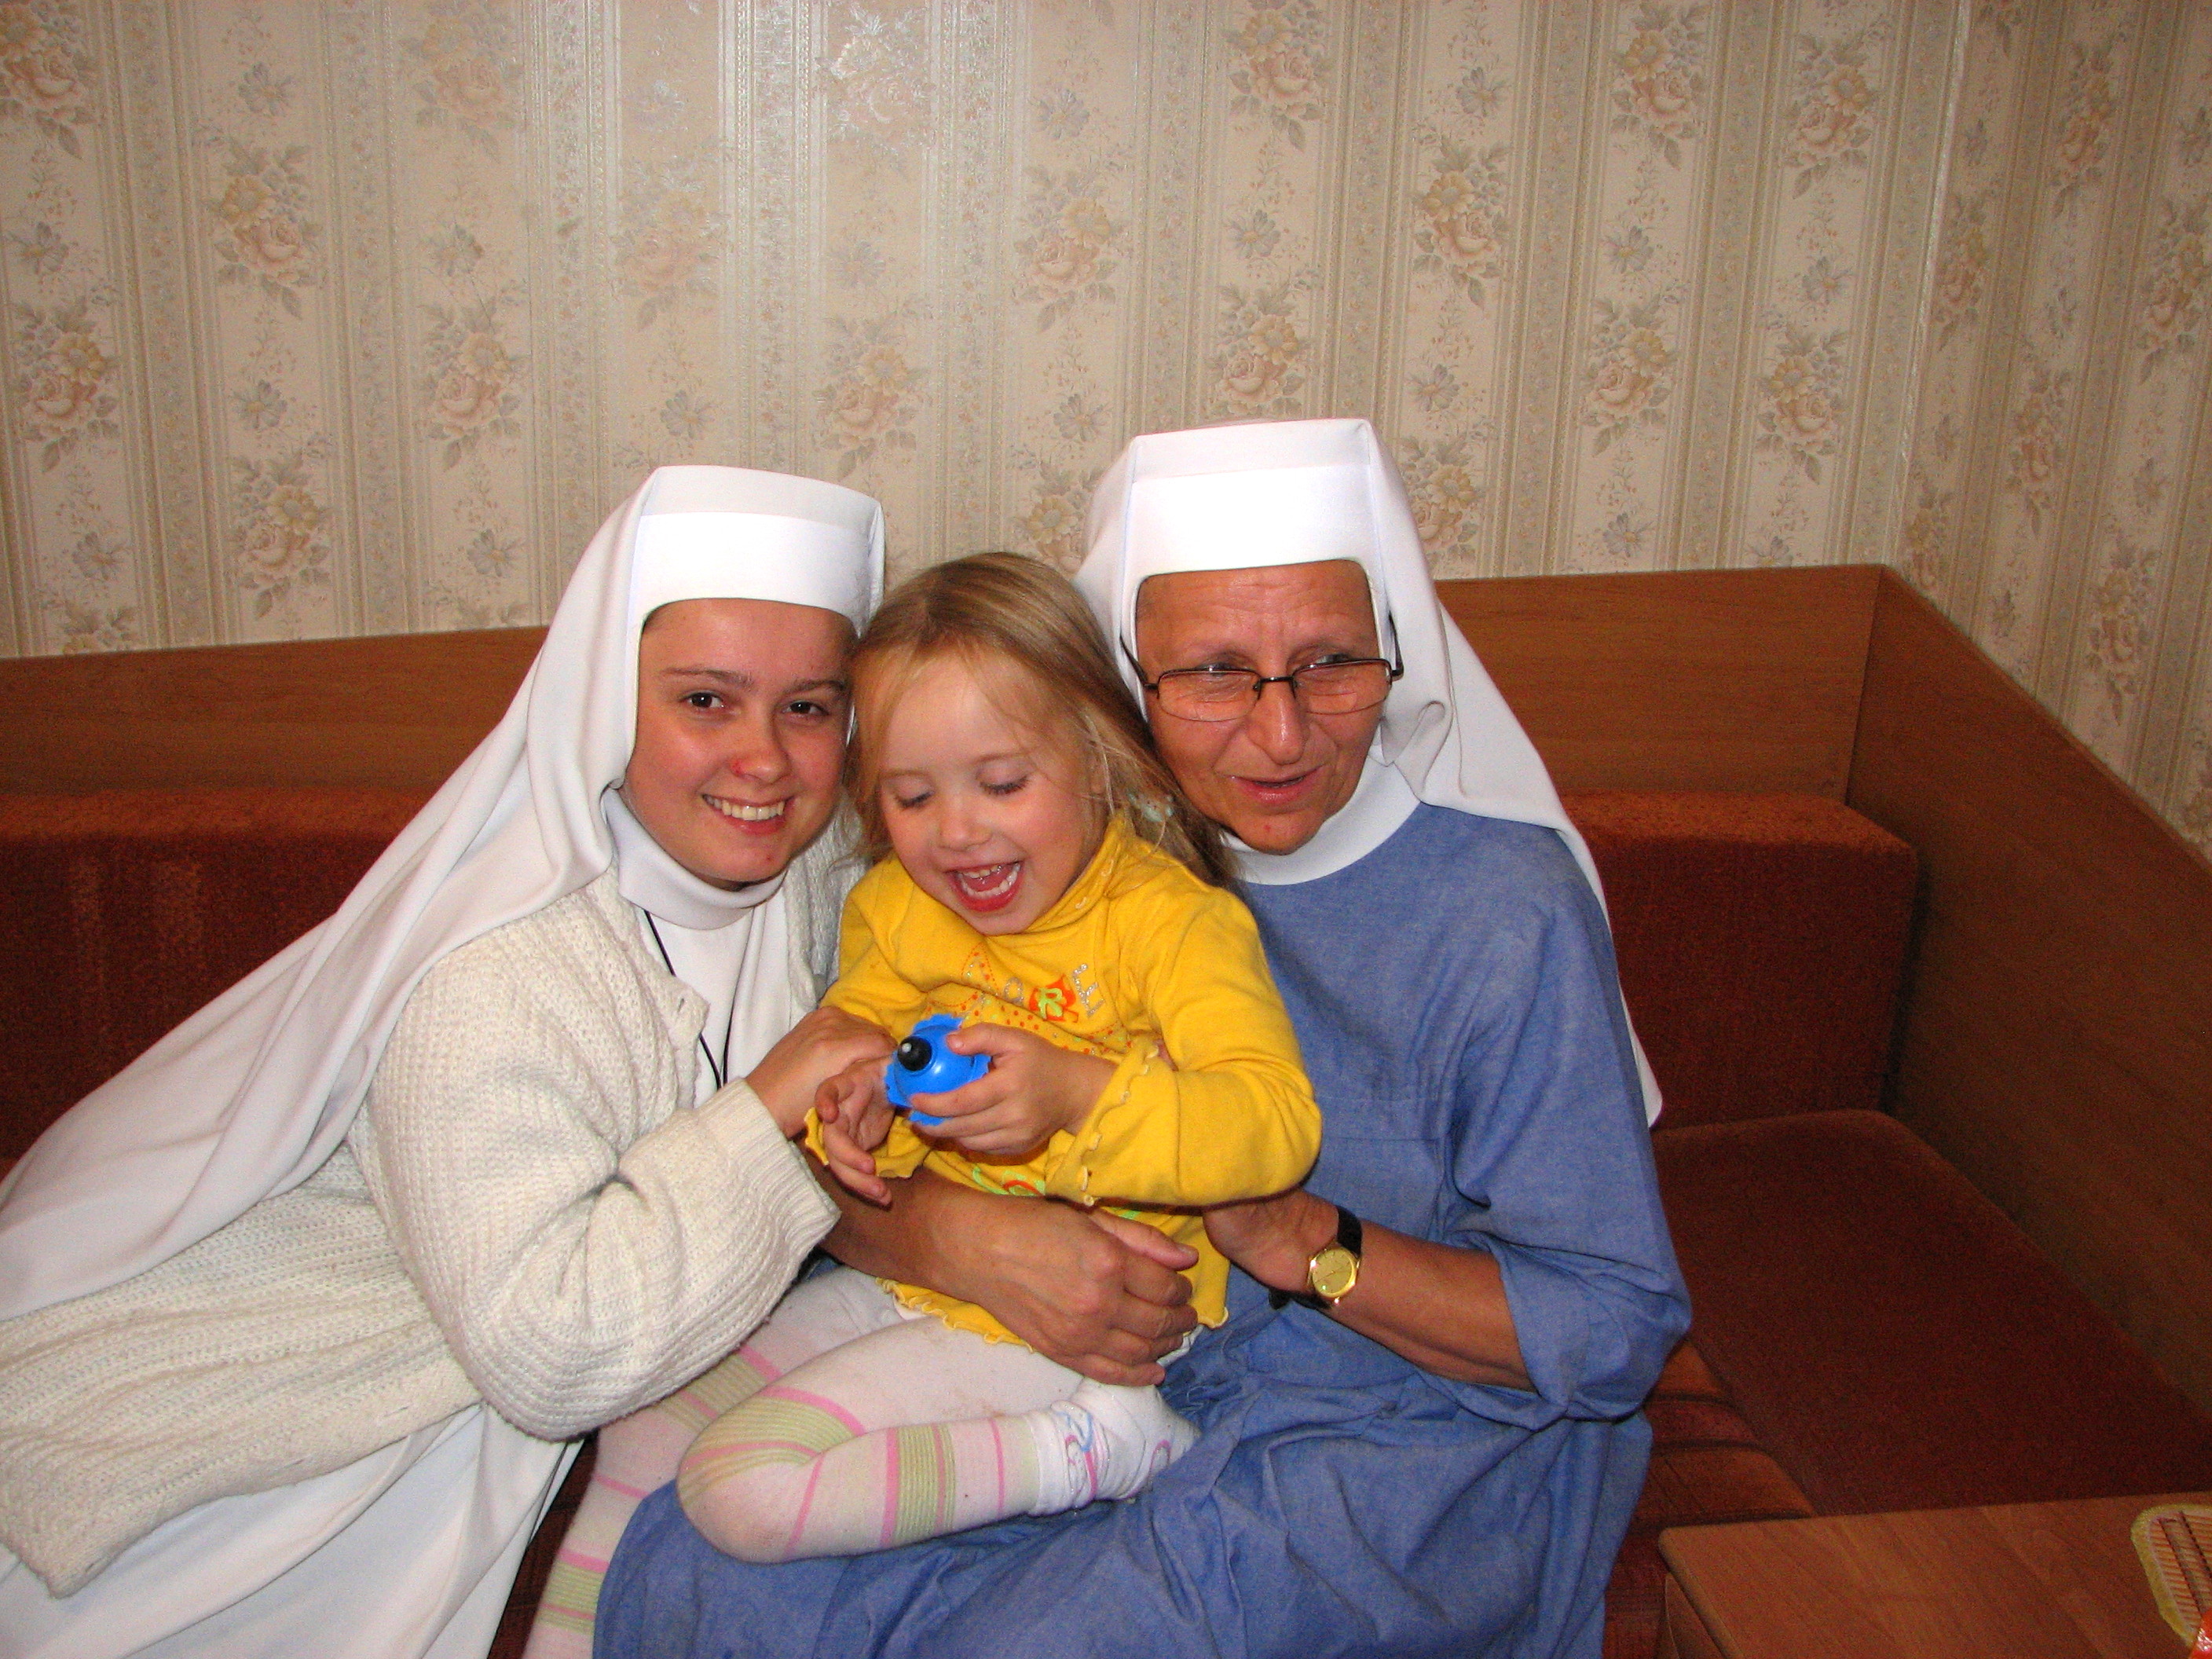 Two Catholic nuns playing with a small child girl, picture 2